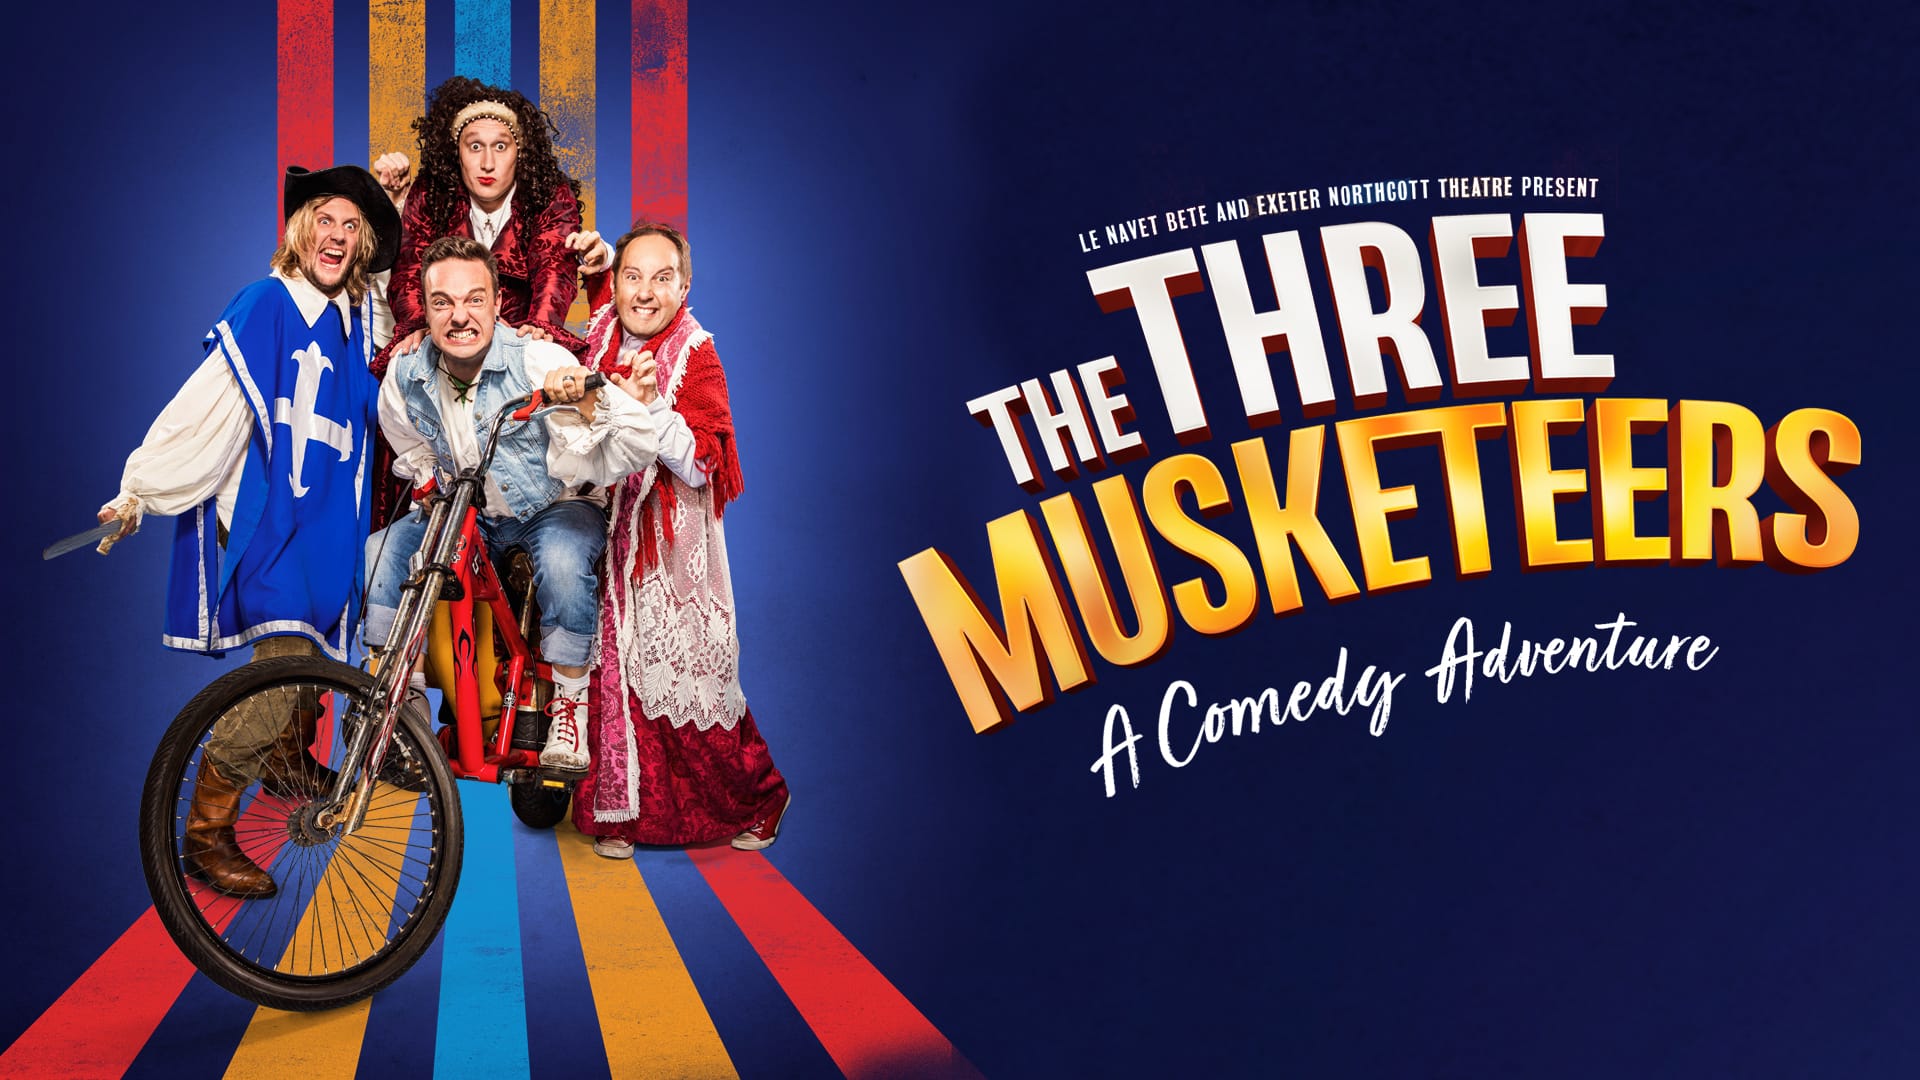 Colourful promotional artwork for The Three Musketeers - A Comedy Adventure. 4 actors in costume staring into the camera in excitement and with some surprise!